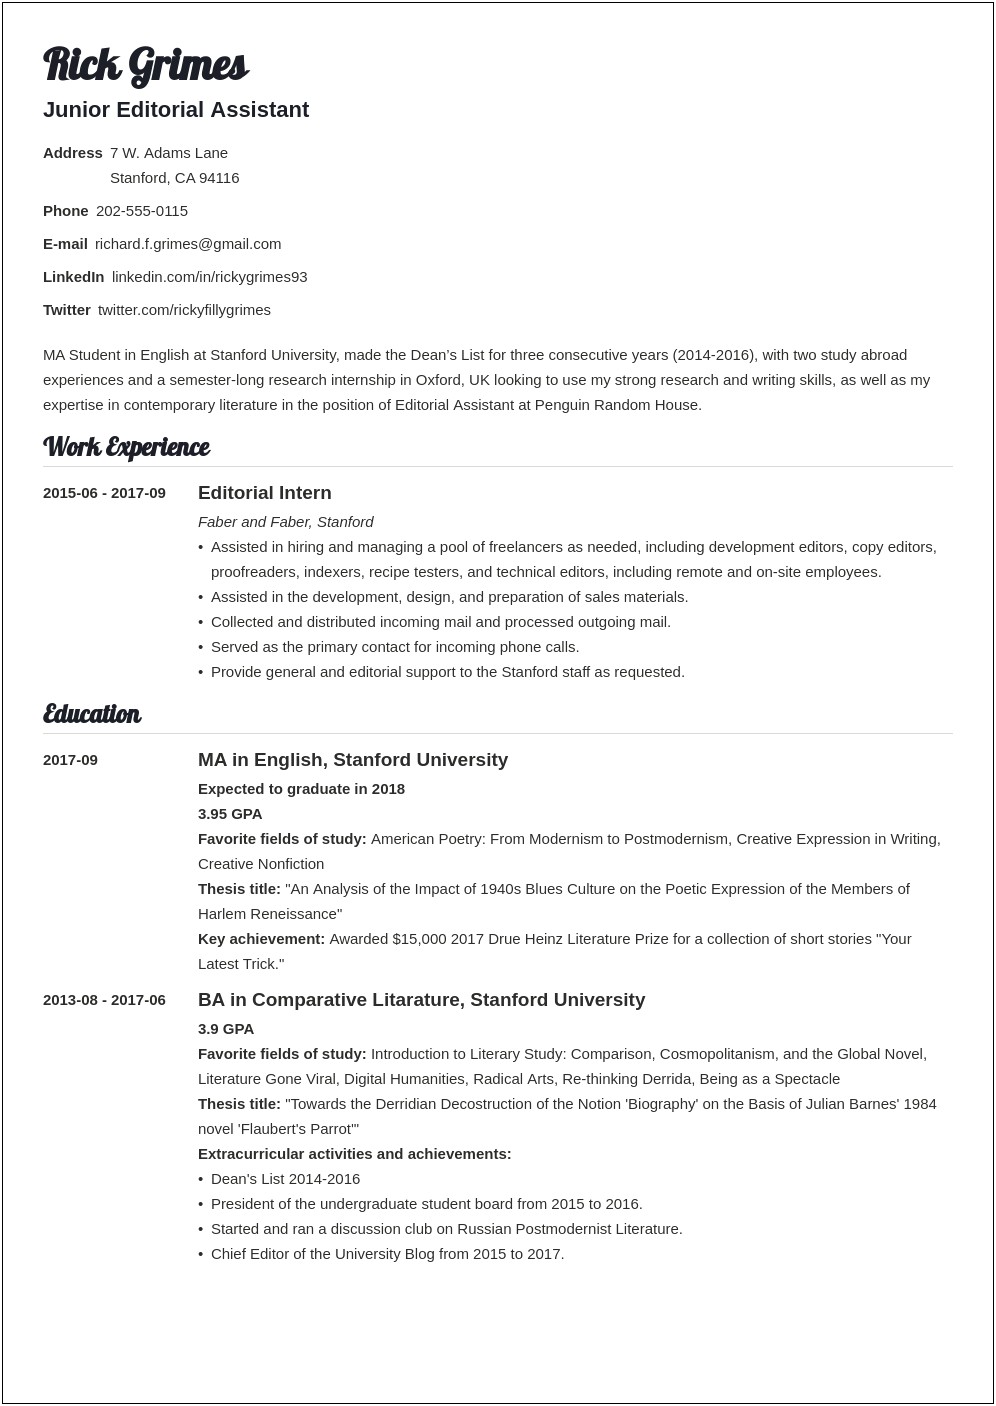 Good Overall Entry Level Objectives For Resumes